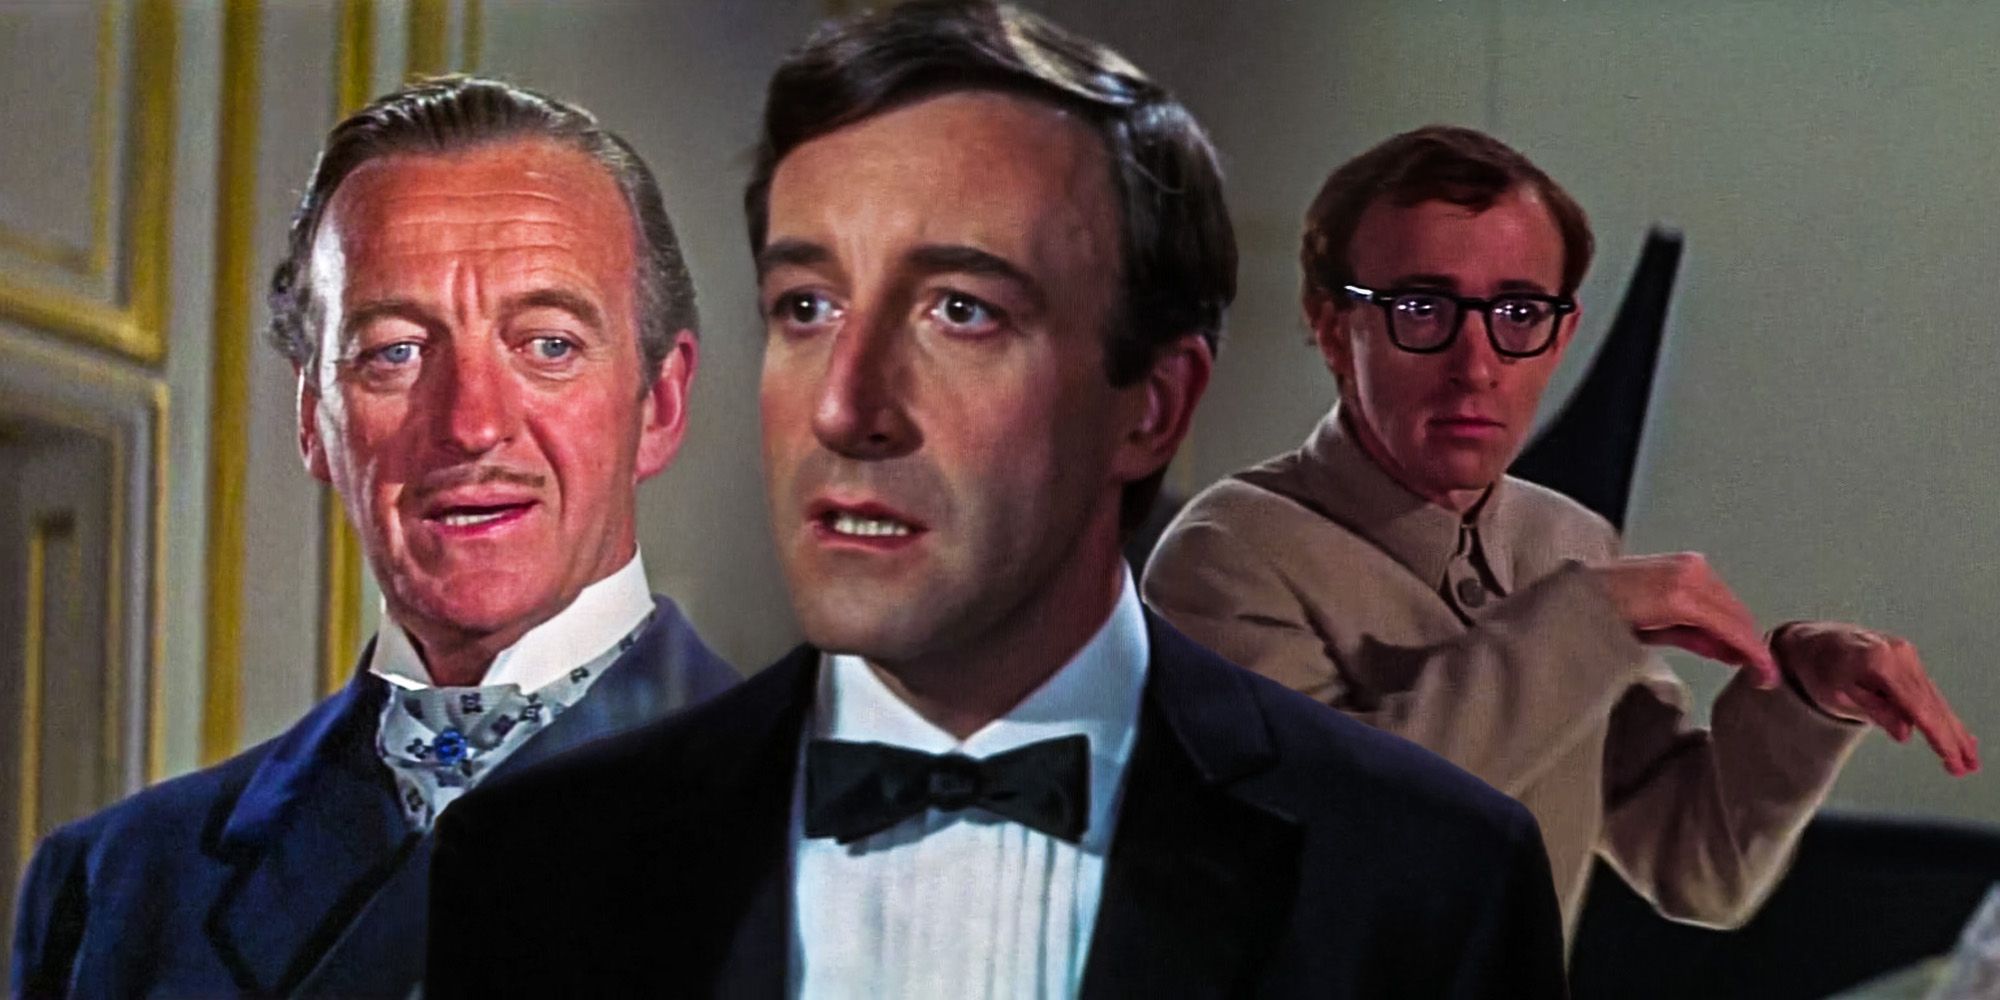 who played james bond in casino royale (1967)